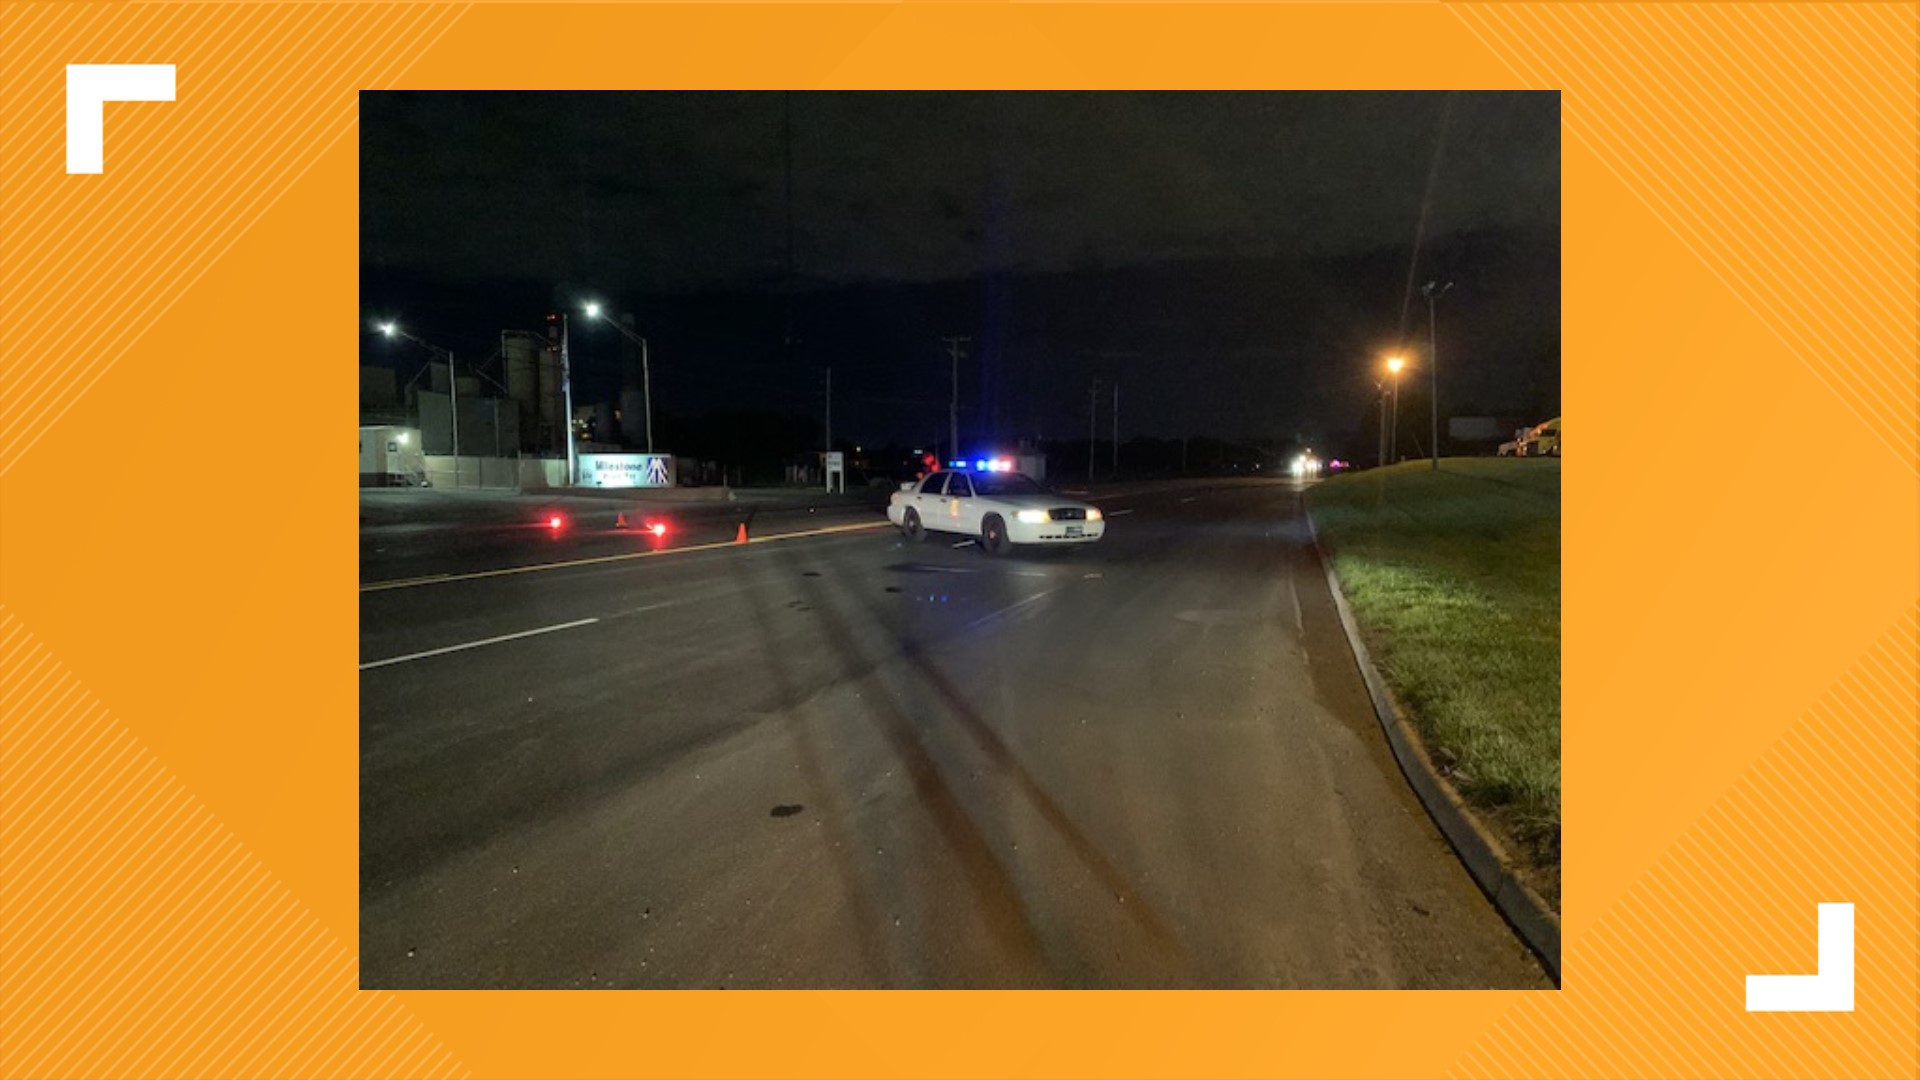 IMPD is investigating after a person was hit by a car near Harding Street and Hanna Avenue late Wednesday night. The person's condition is unknown at this time.